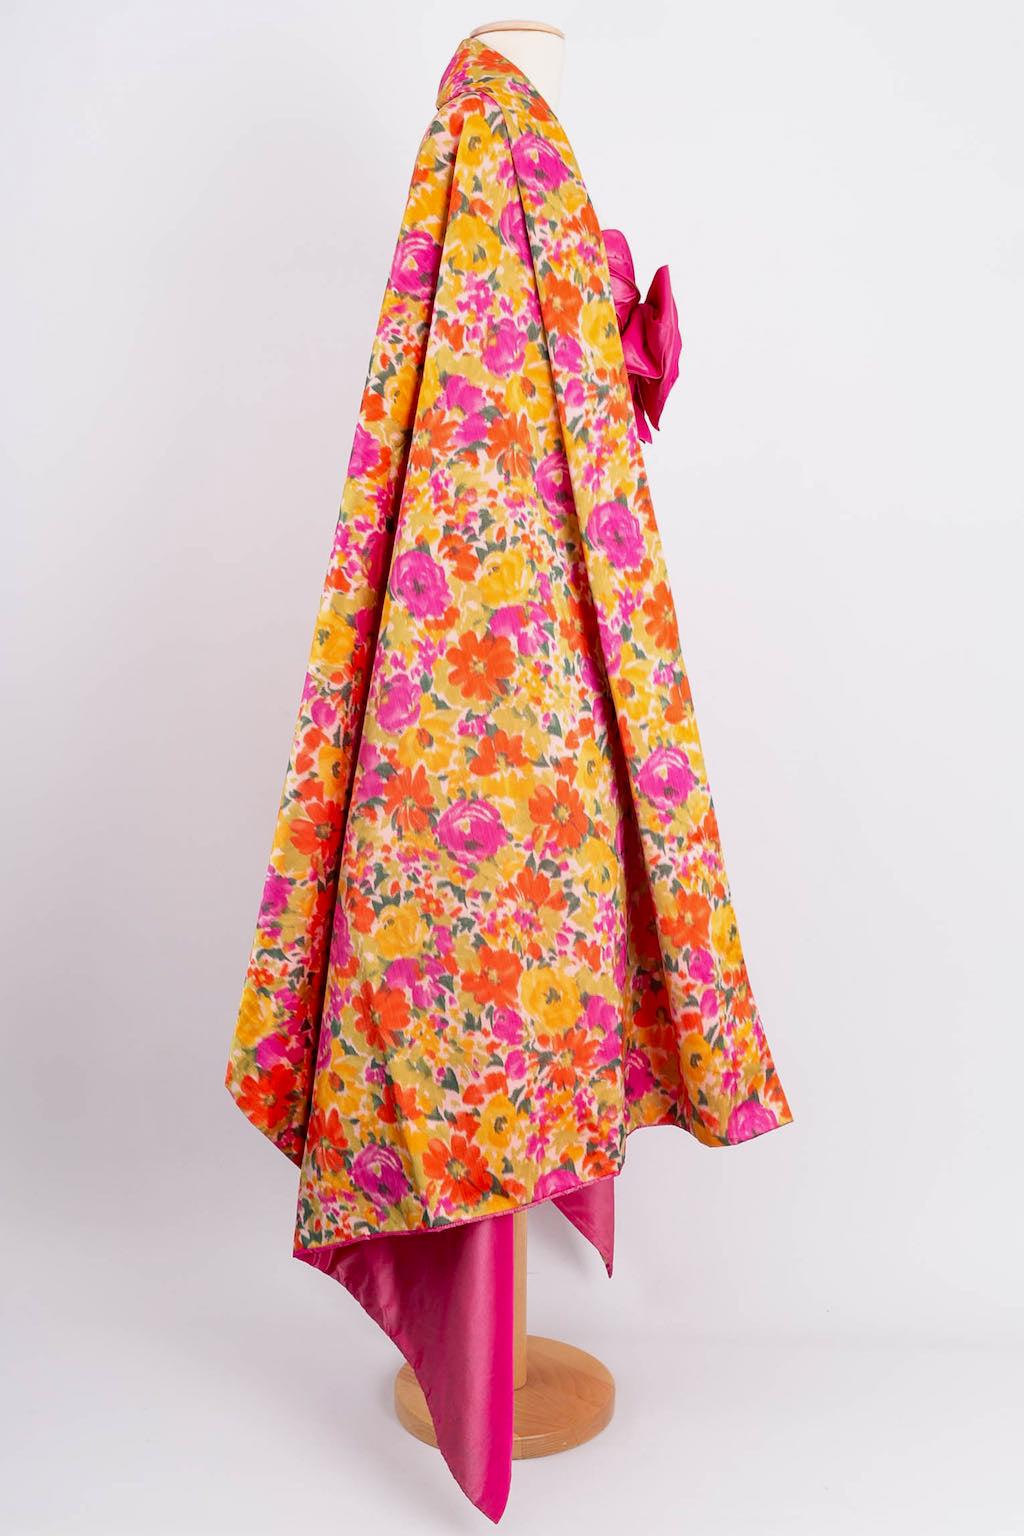 Nina Ricci Flower Silk Dress and its Stole In Excellent Condition For Sale In SAINT-OUEN-SUR-SEINE, FR